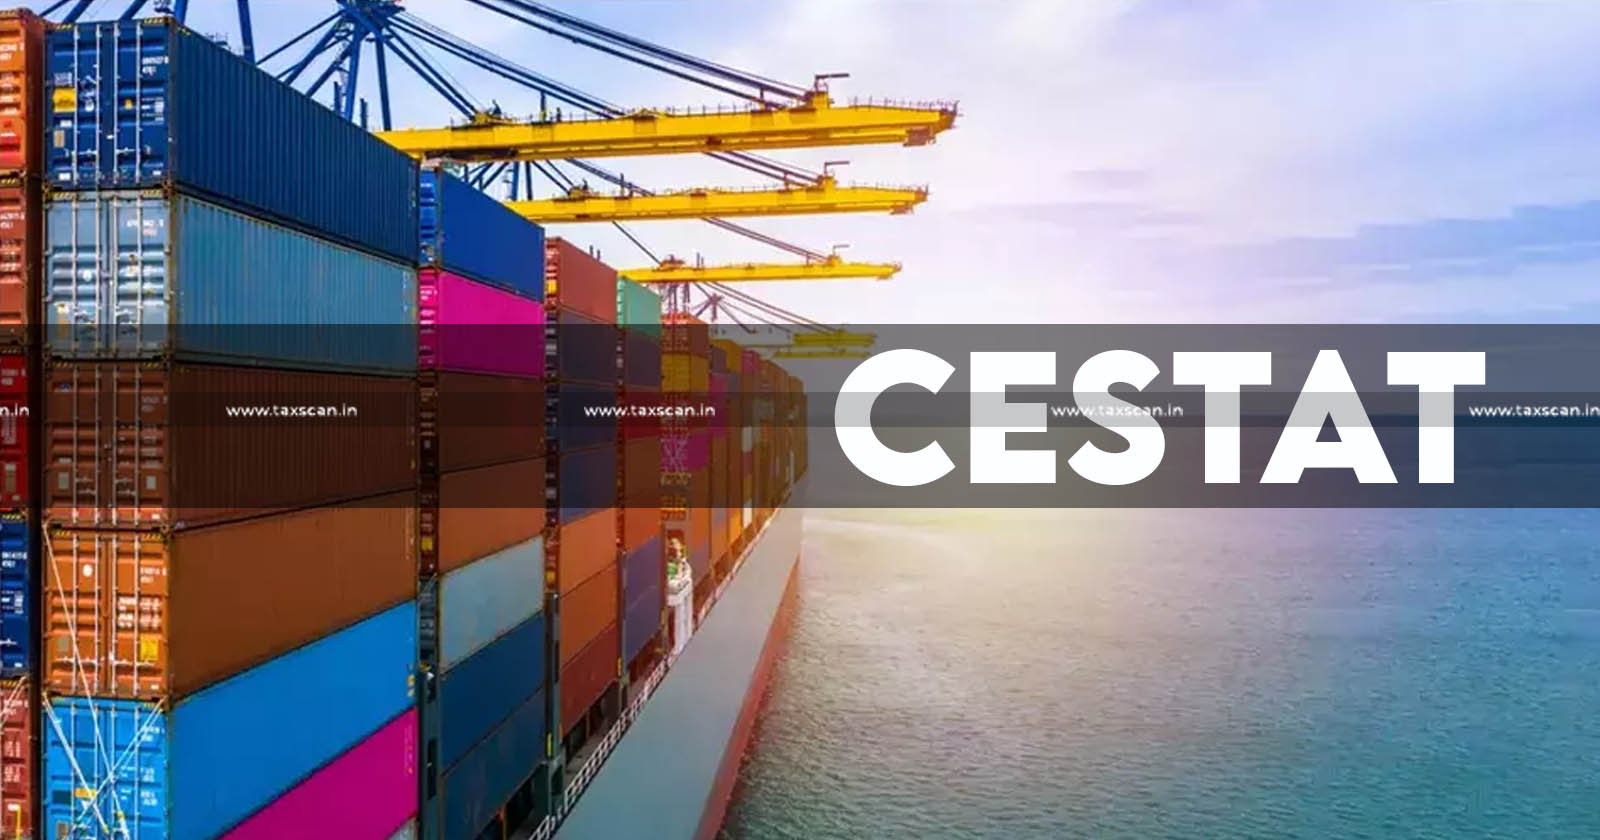 Loading and unloading of Goods - Goods - Goods at Port - CESTAT - taxscan